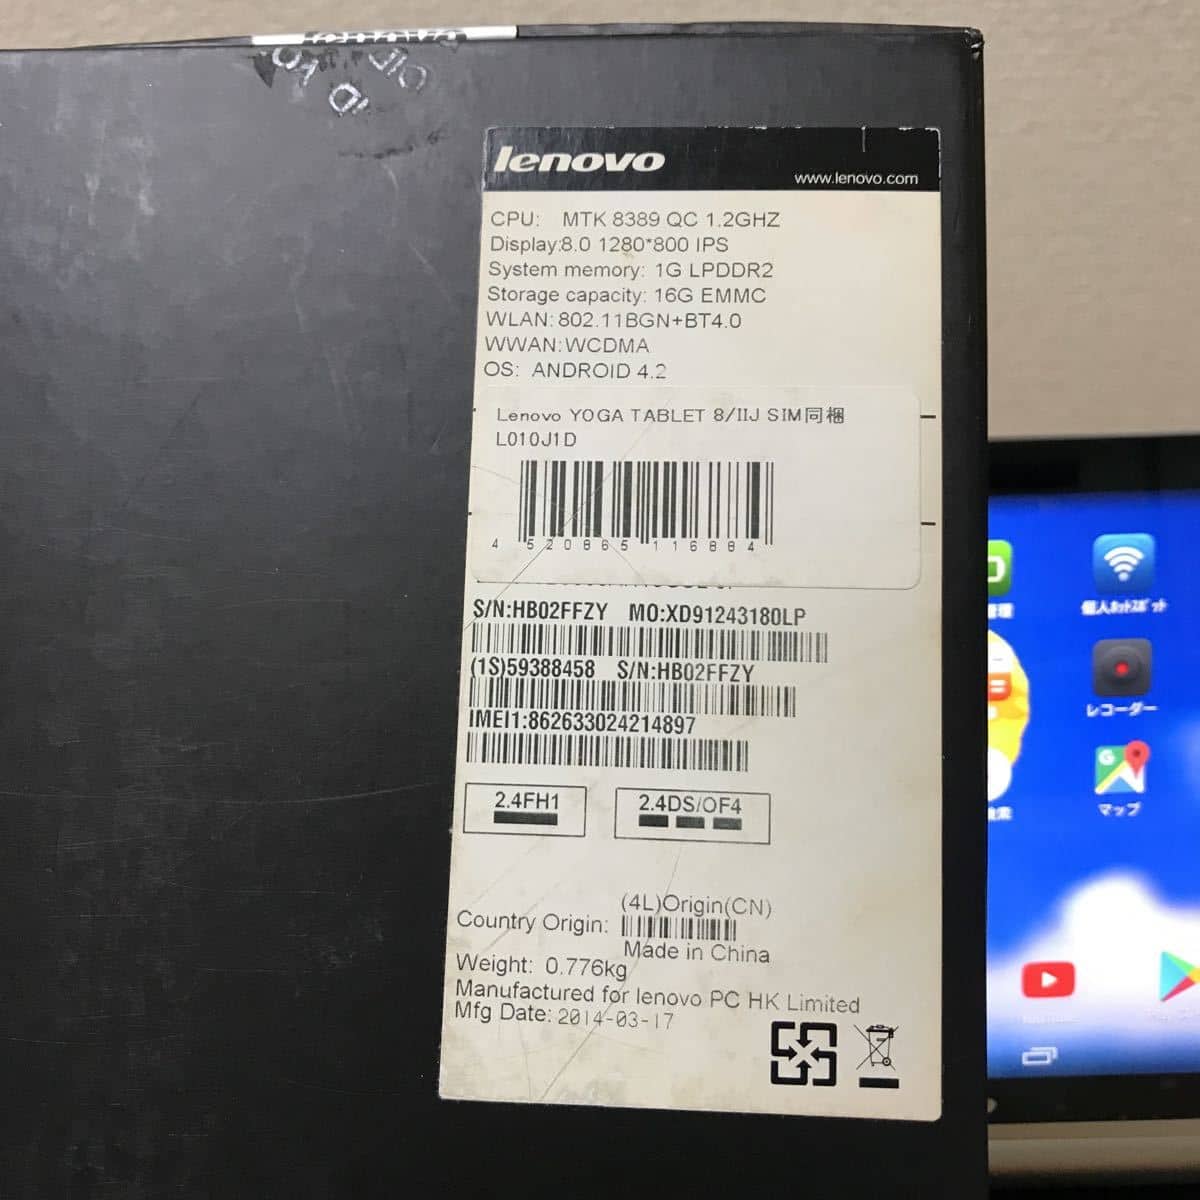 Used]Lenovo yoga tablet 8 3G SIM-free ANDROID tablet - BE FORWARD Store